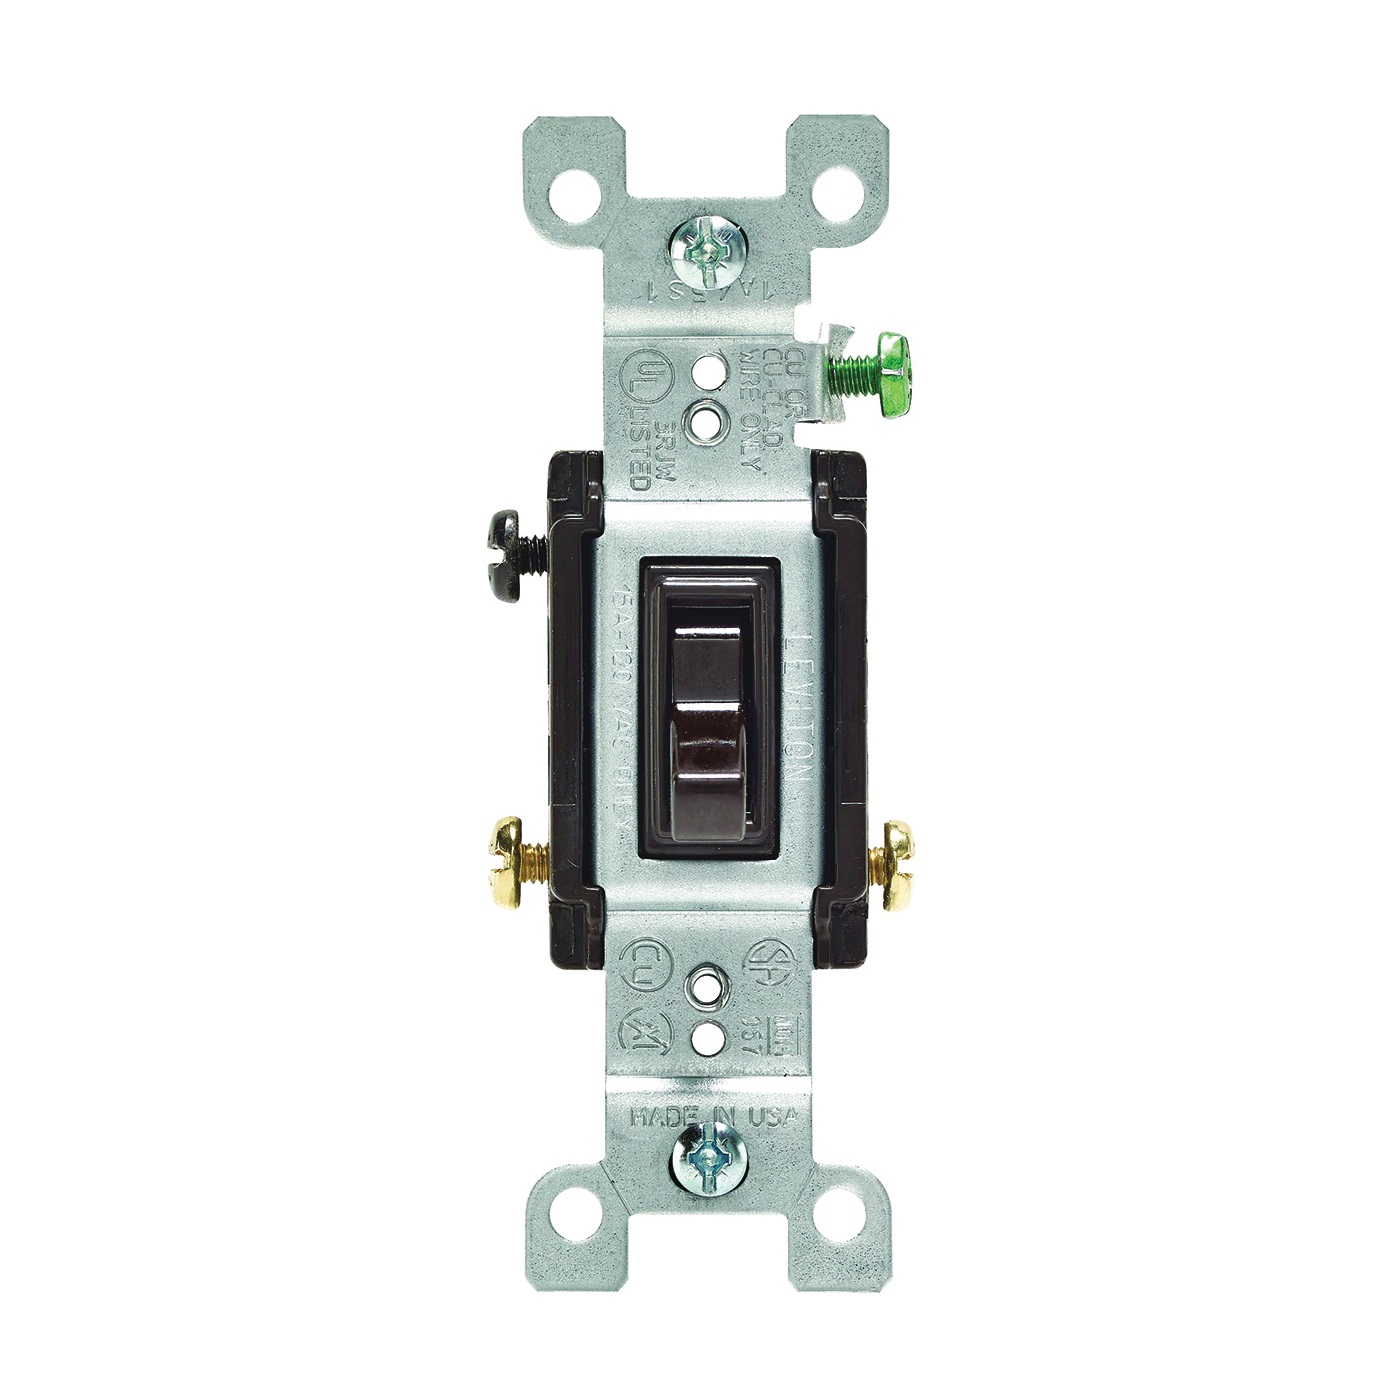 Leviton 1453-2 Switch, 15 A, 120 V, 3-Way, Push-In Terminal, Thermoplastic Housing Material, Brown - 1